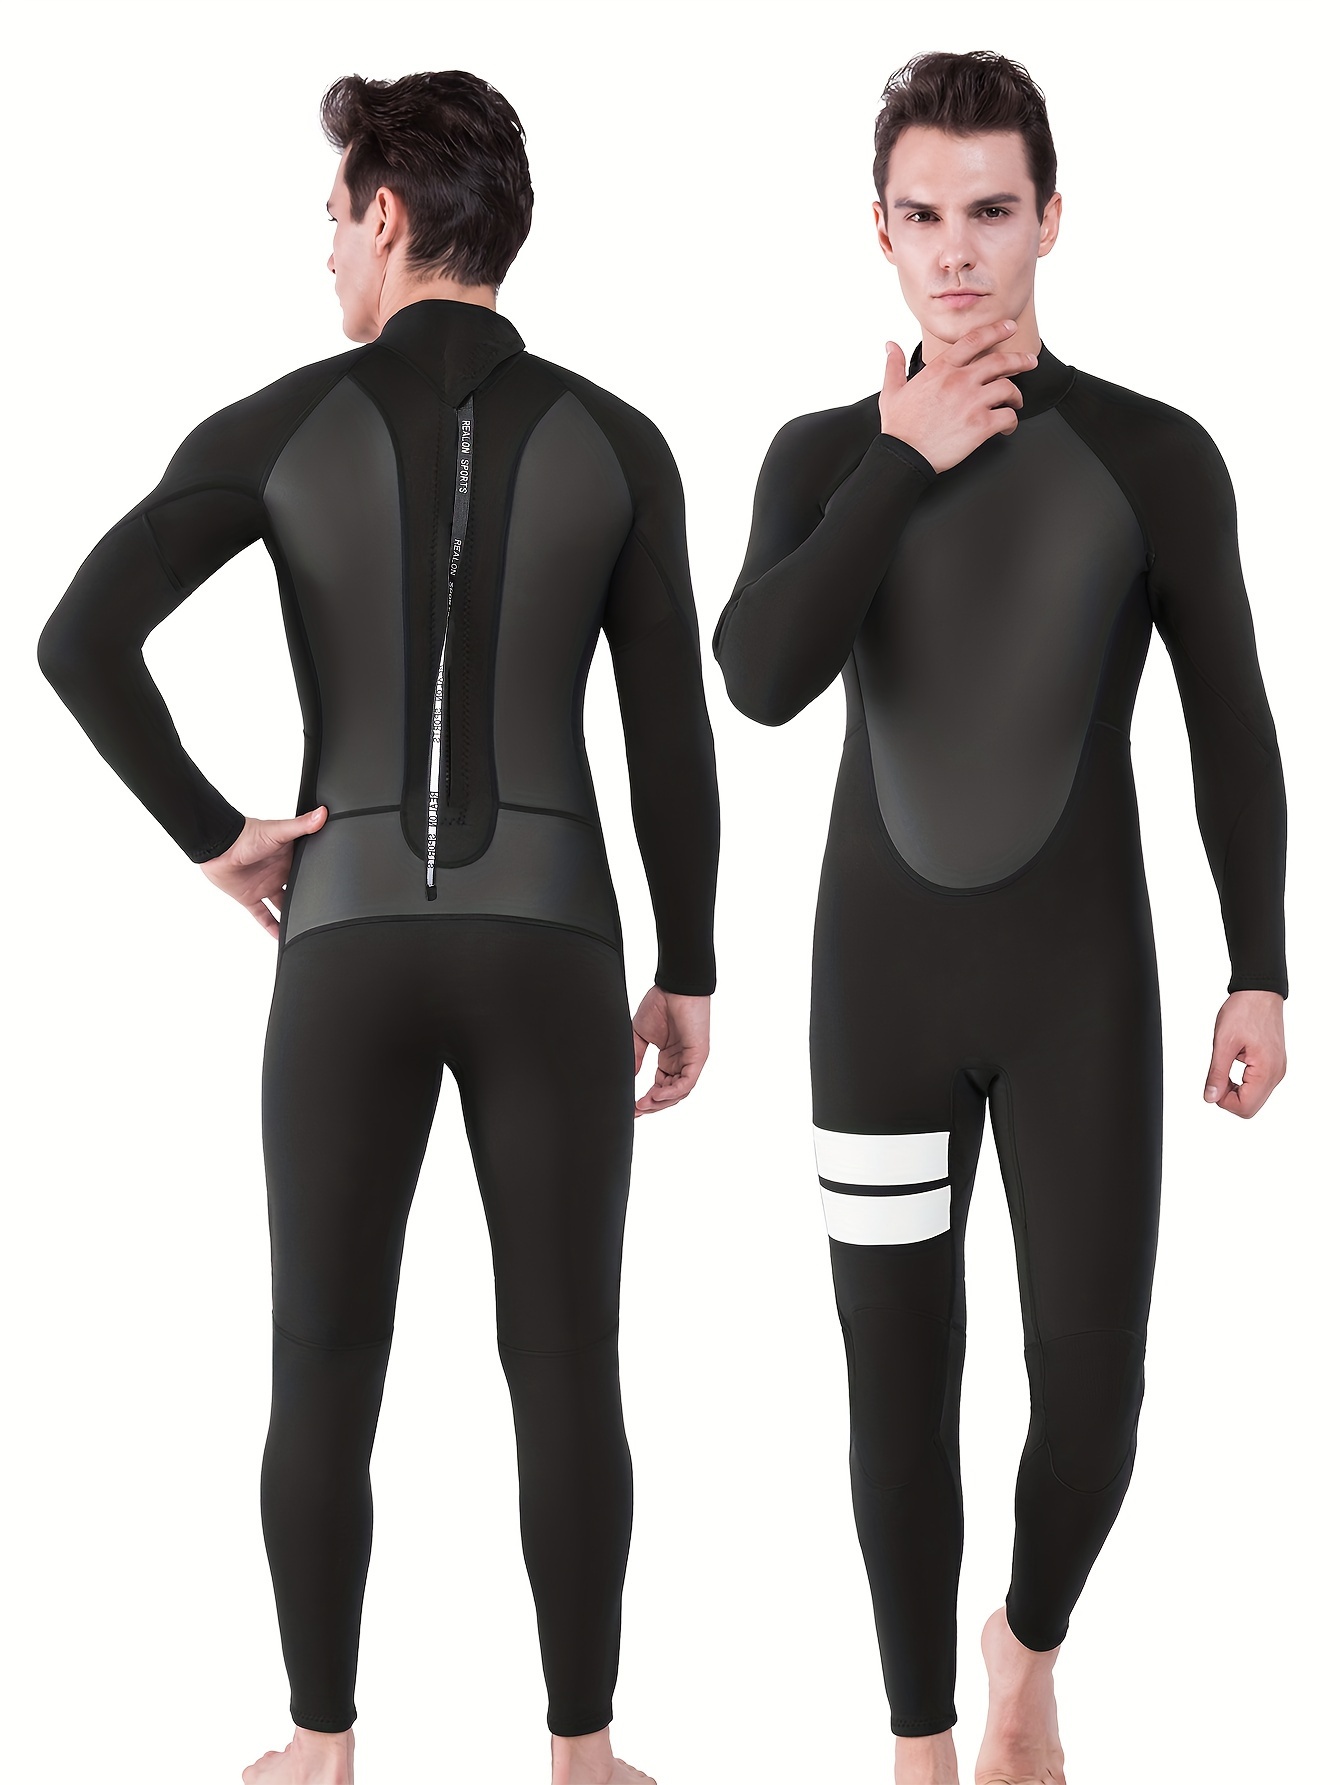  REALON Men Wetsuit Neoprene Wet Suits 3mm Full Body Long  Sleeves Swimsuit For Scuba Diving Swimming Surfing Adult In Cold Water  Aerobics